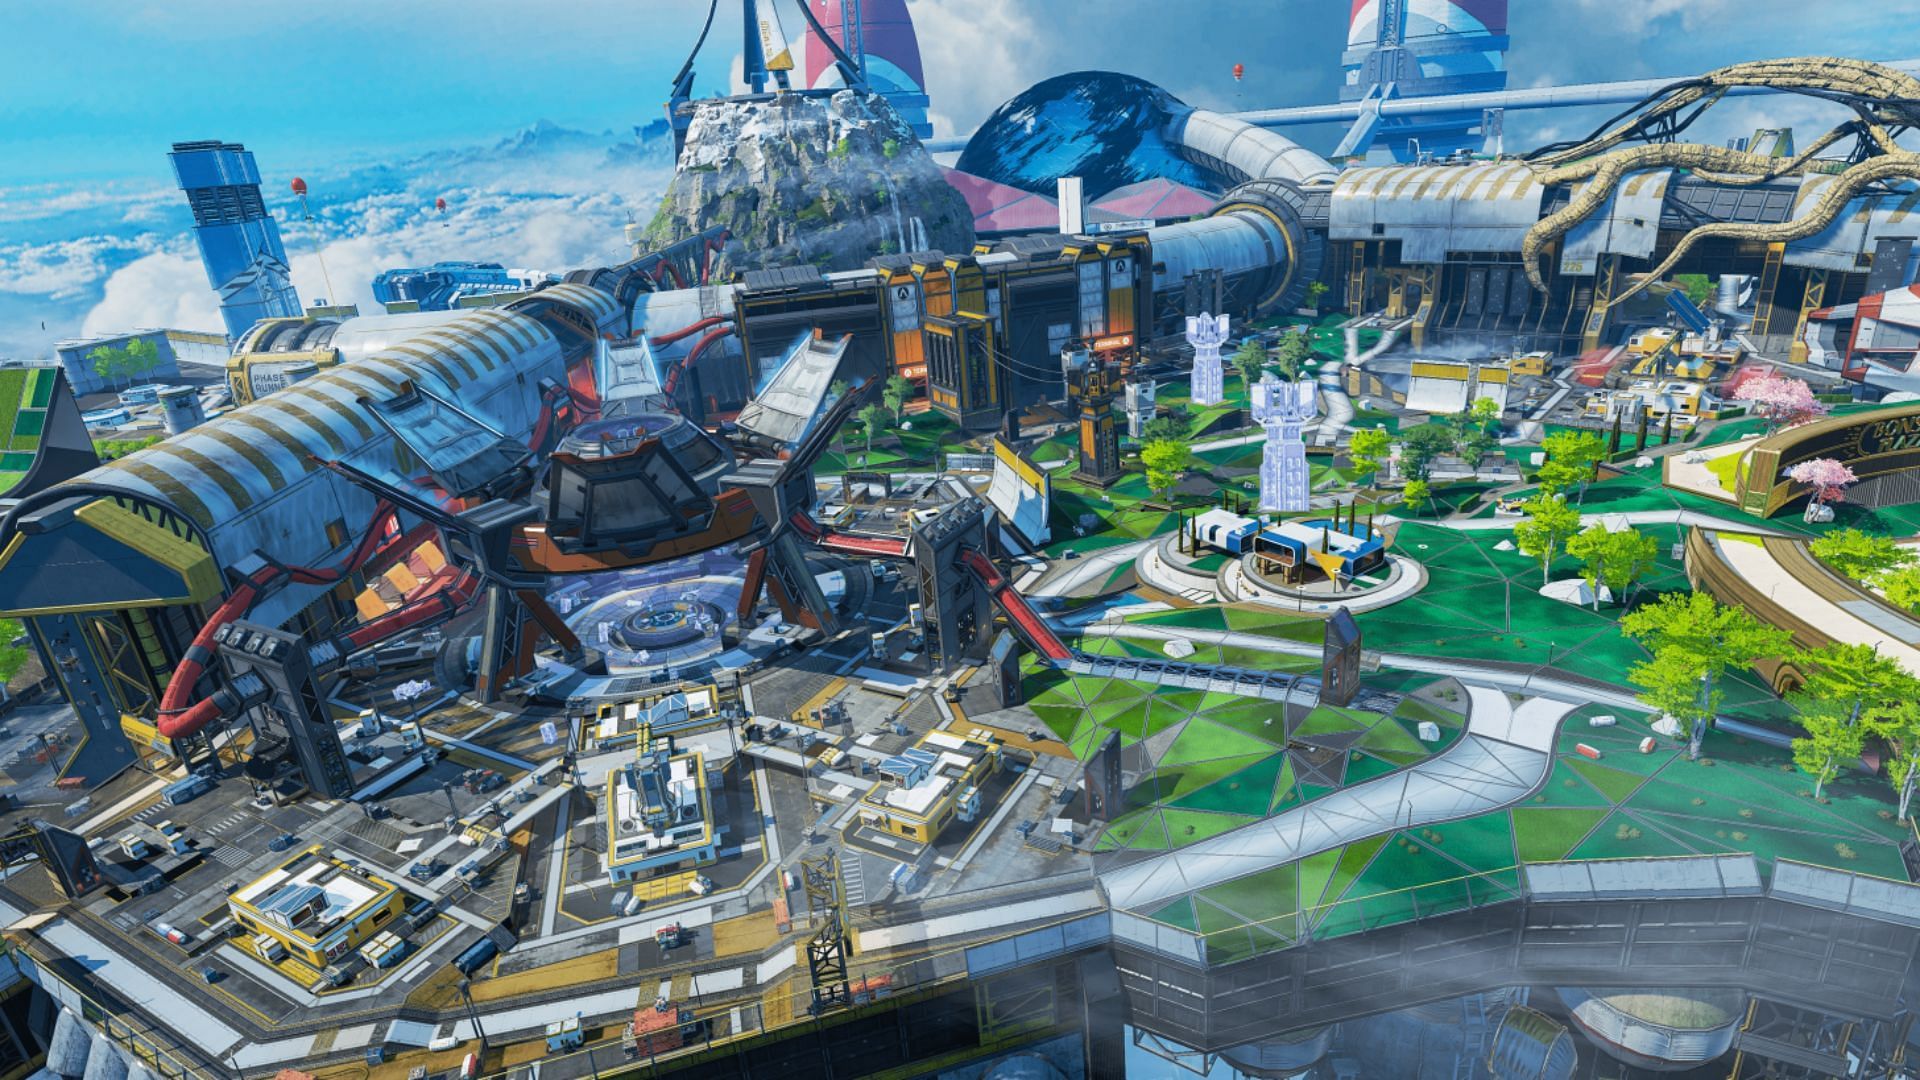 The 12th season of Apex Legends, Defiance, is set to launch on February 8, 2022 (Image by Respawn)